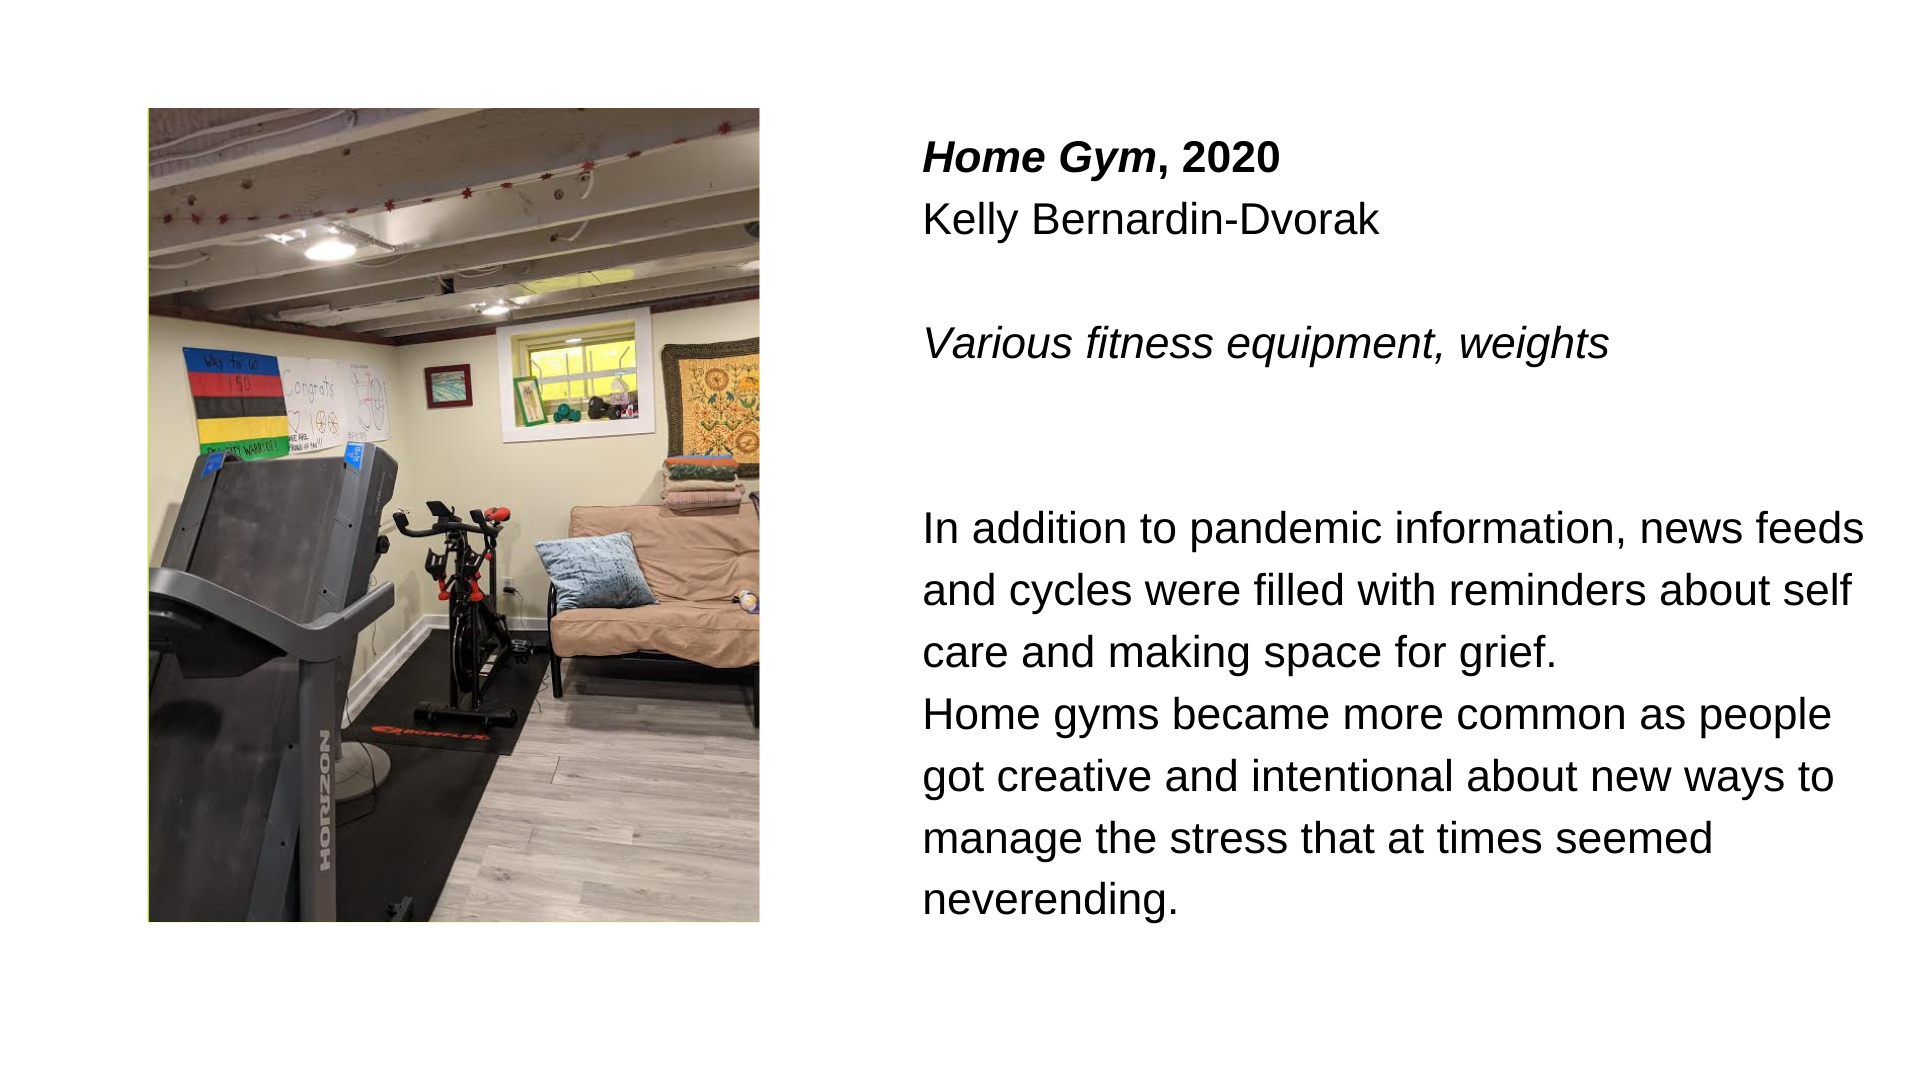  A treadmill and an elliptical in what appears to be a basement, next to a couch. Next to this, the text “Home Gym, 2020 - Kelly Bernardin-Dvorak. Various fitness equipment, weights.  In addition to pandemic information, news feeds and cycles were fi